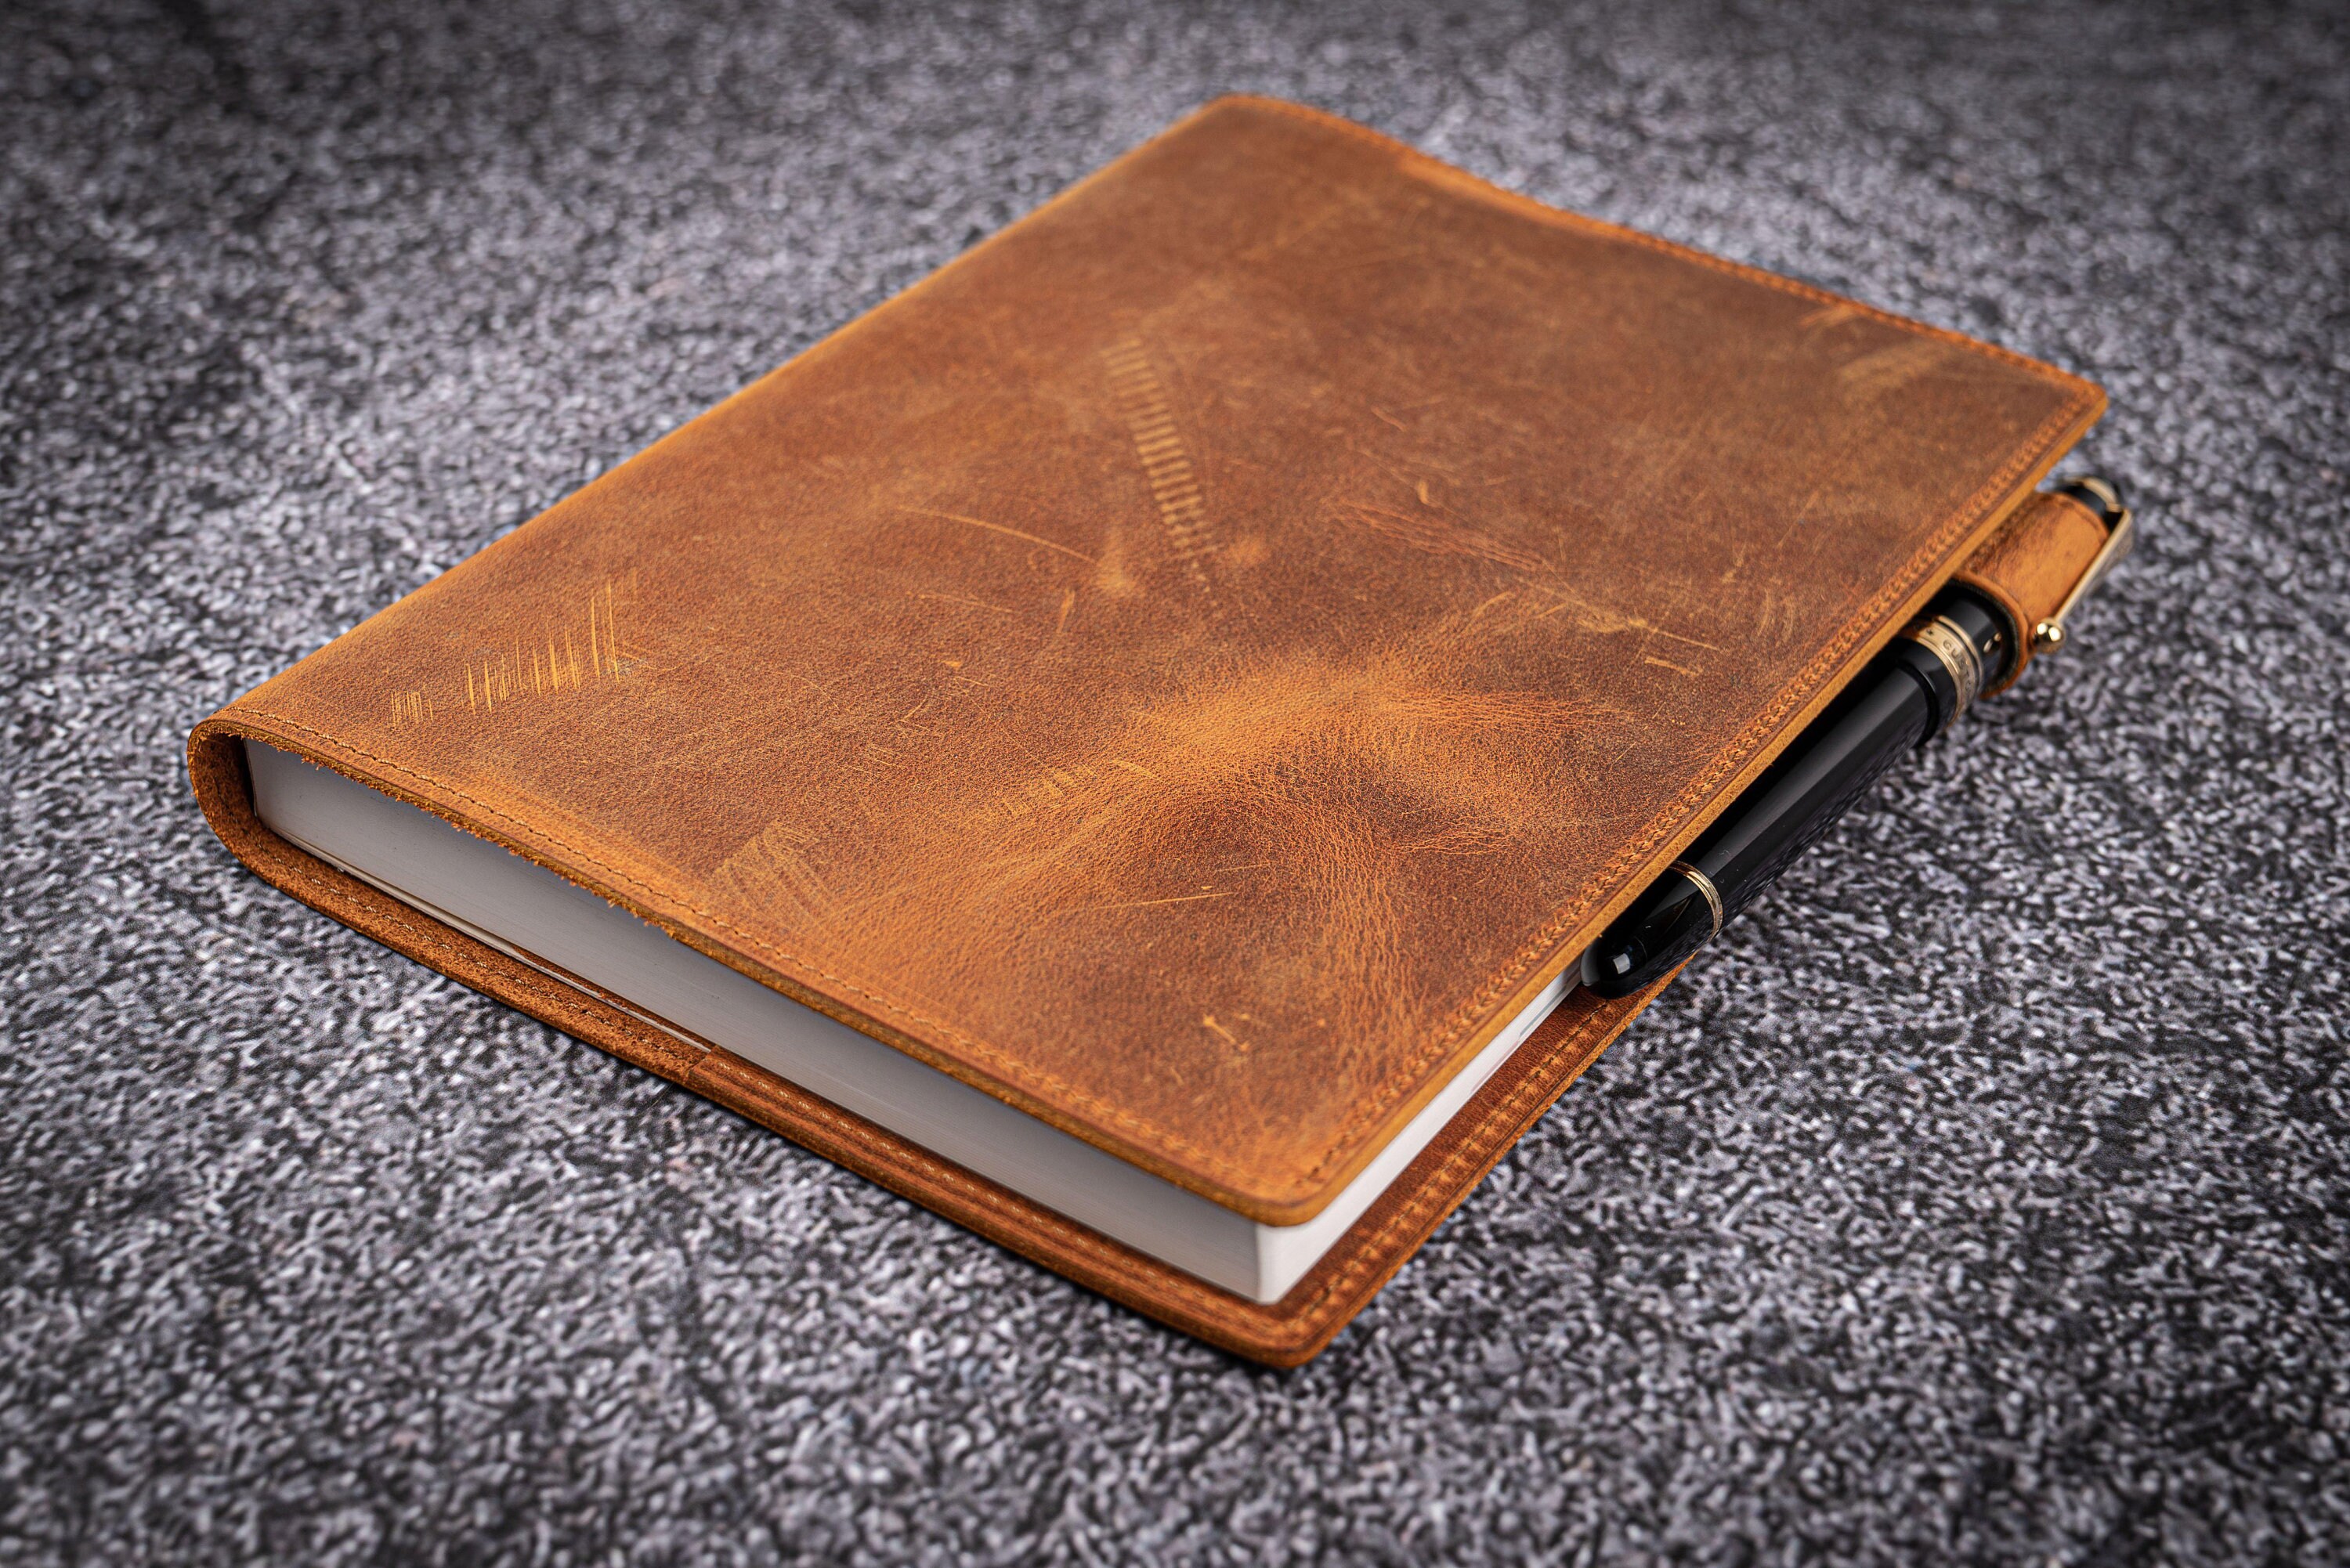 Galen Leather Slim Hobonichi Weeks Planner Cover- Undyed Leather